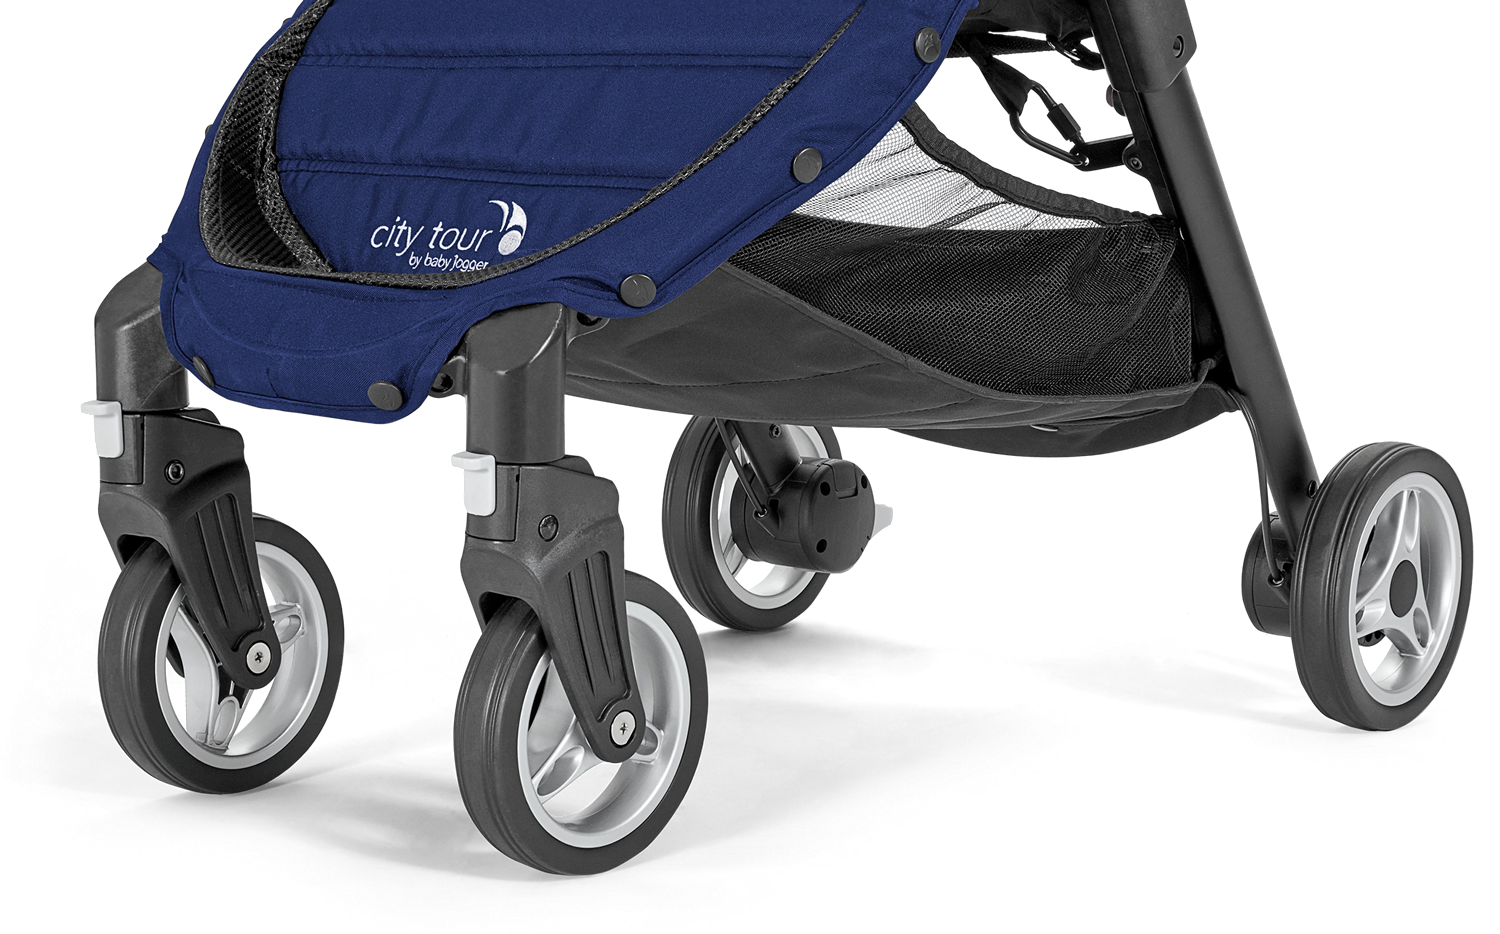 baby jogger city tour carry on